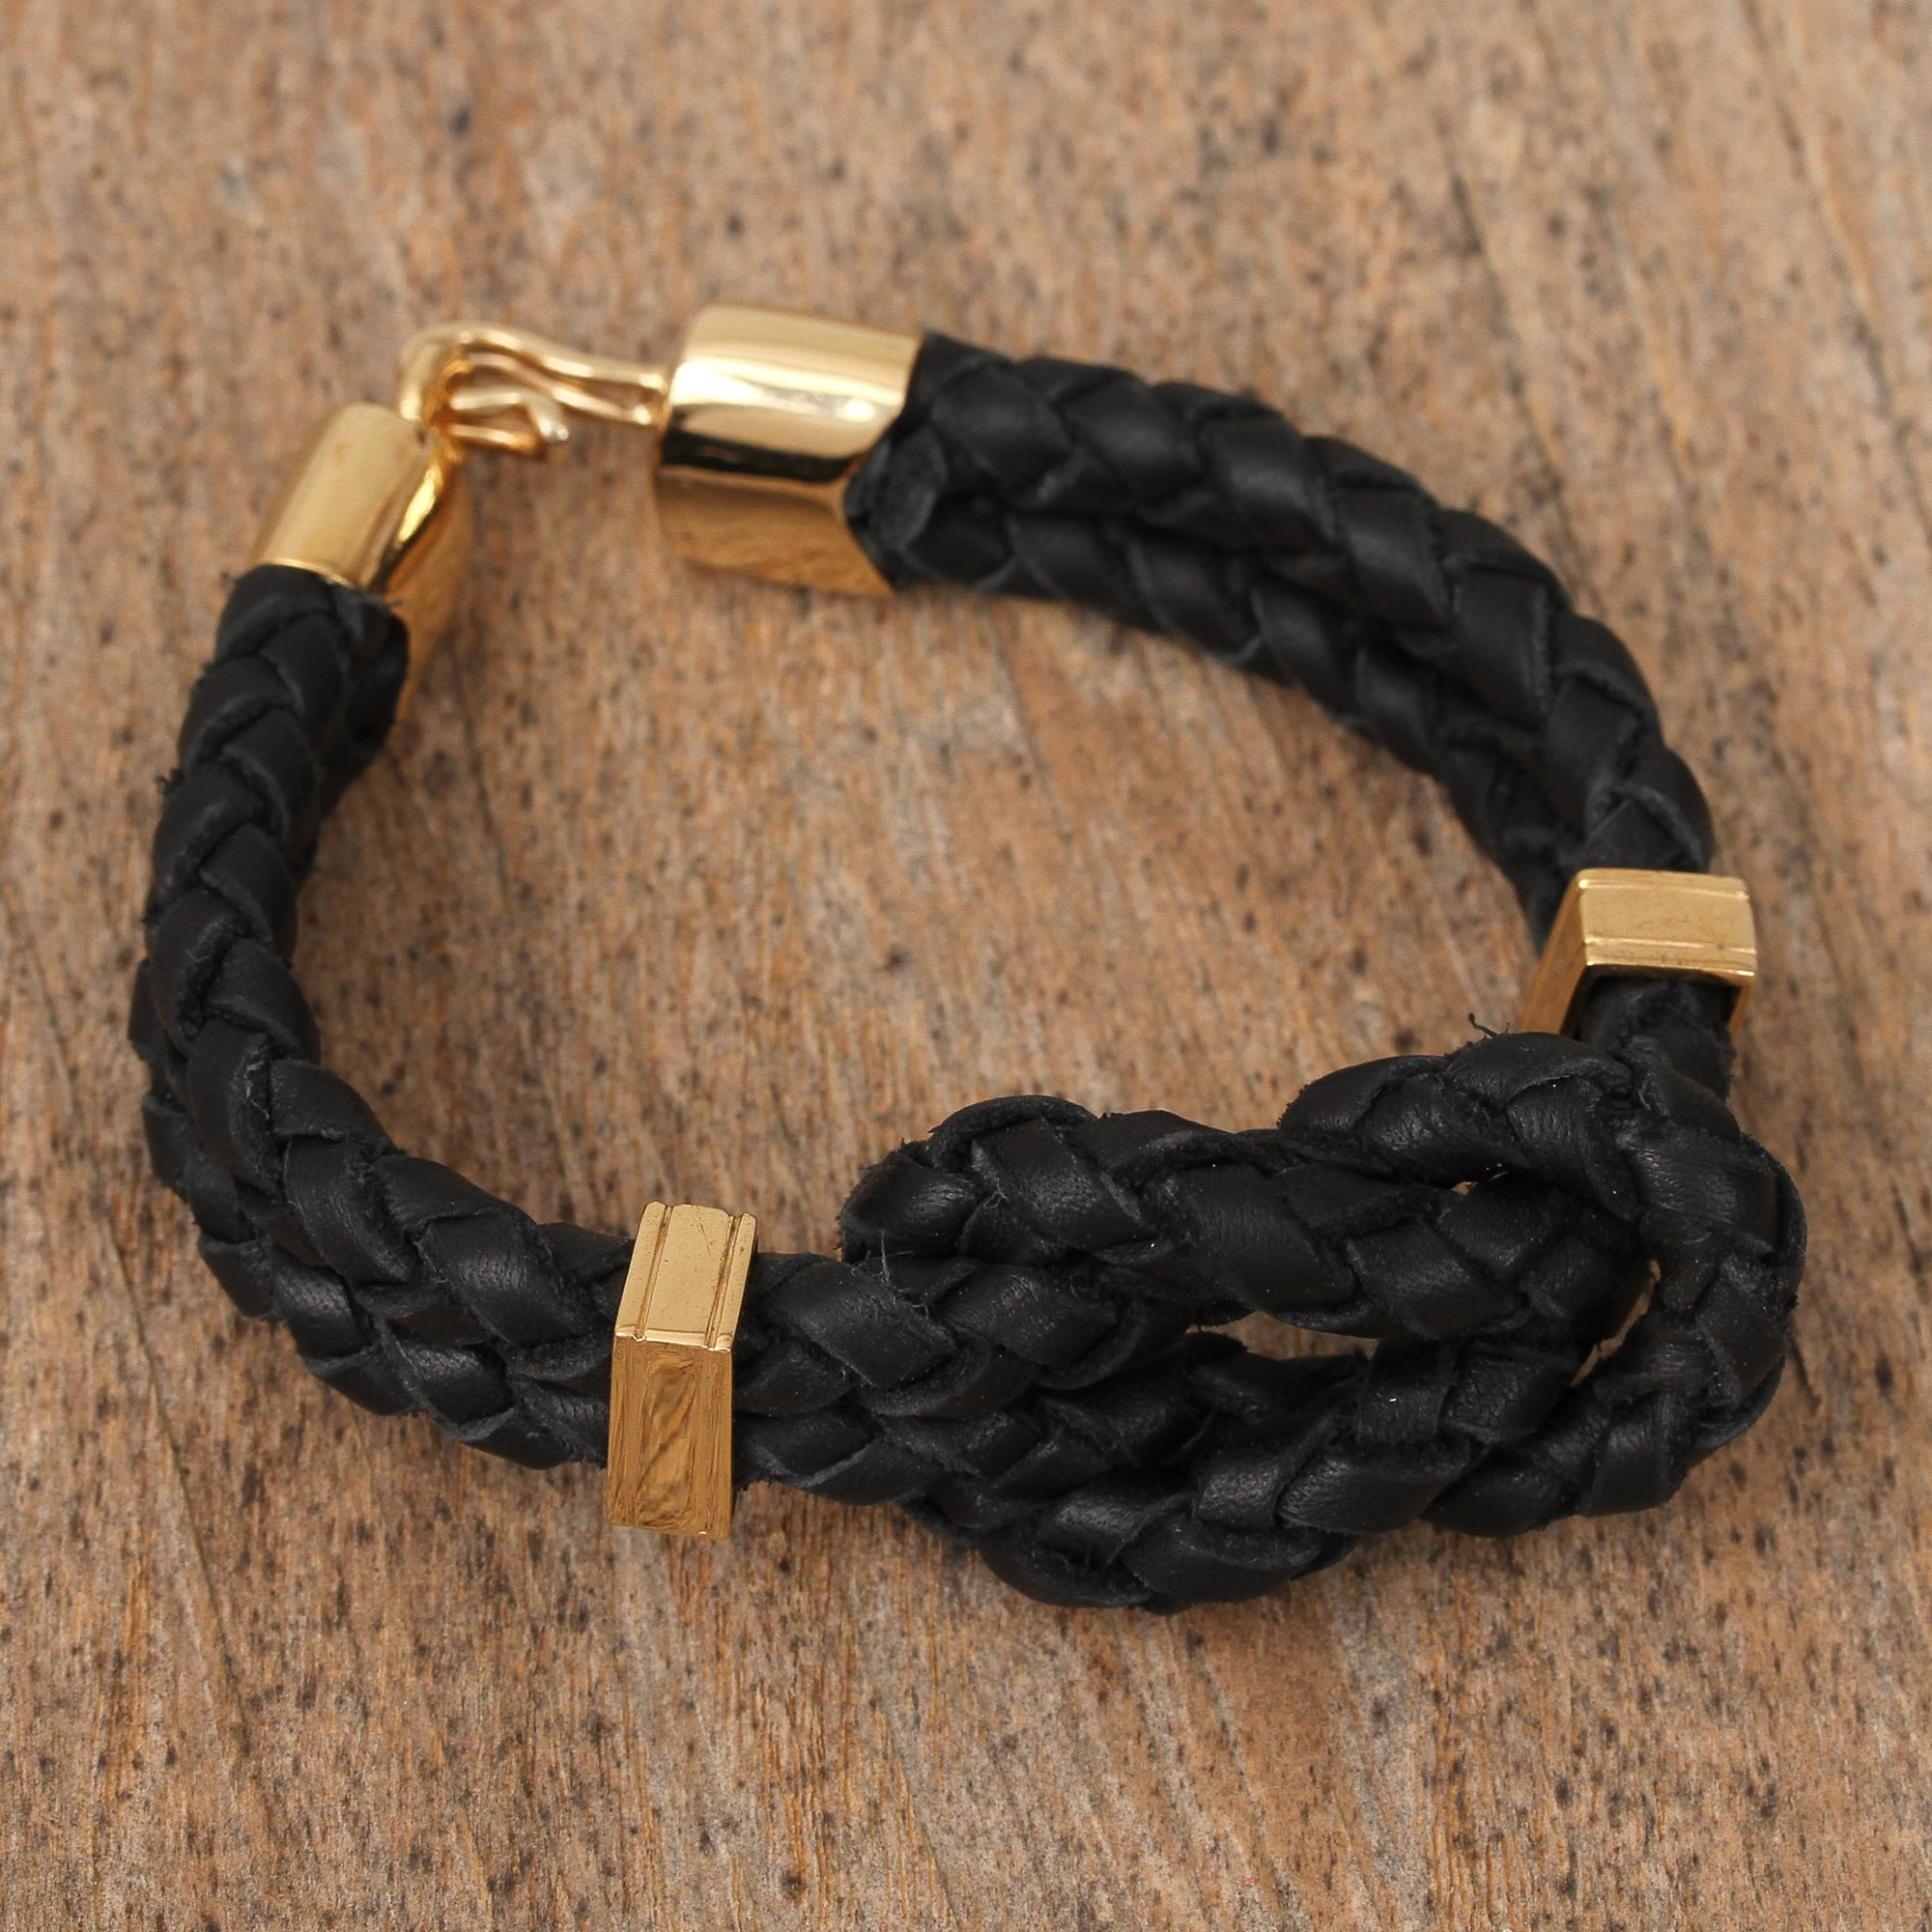 Braided Leather and Gold-Plated Bracelet